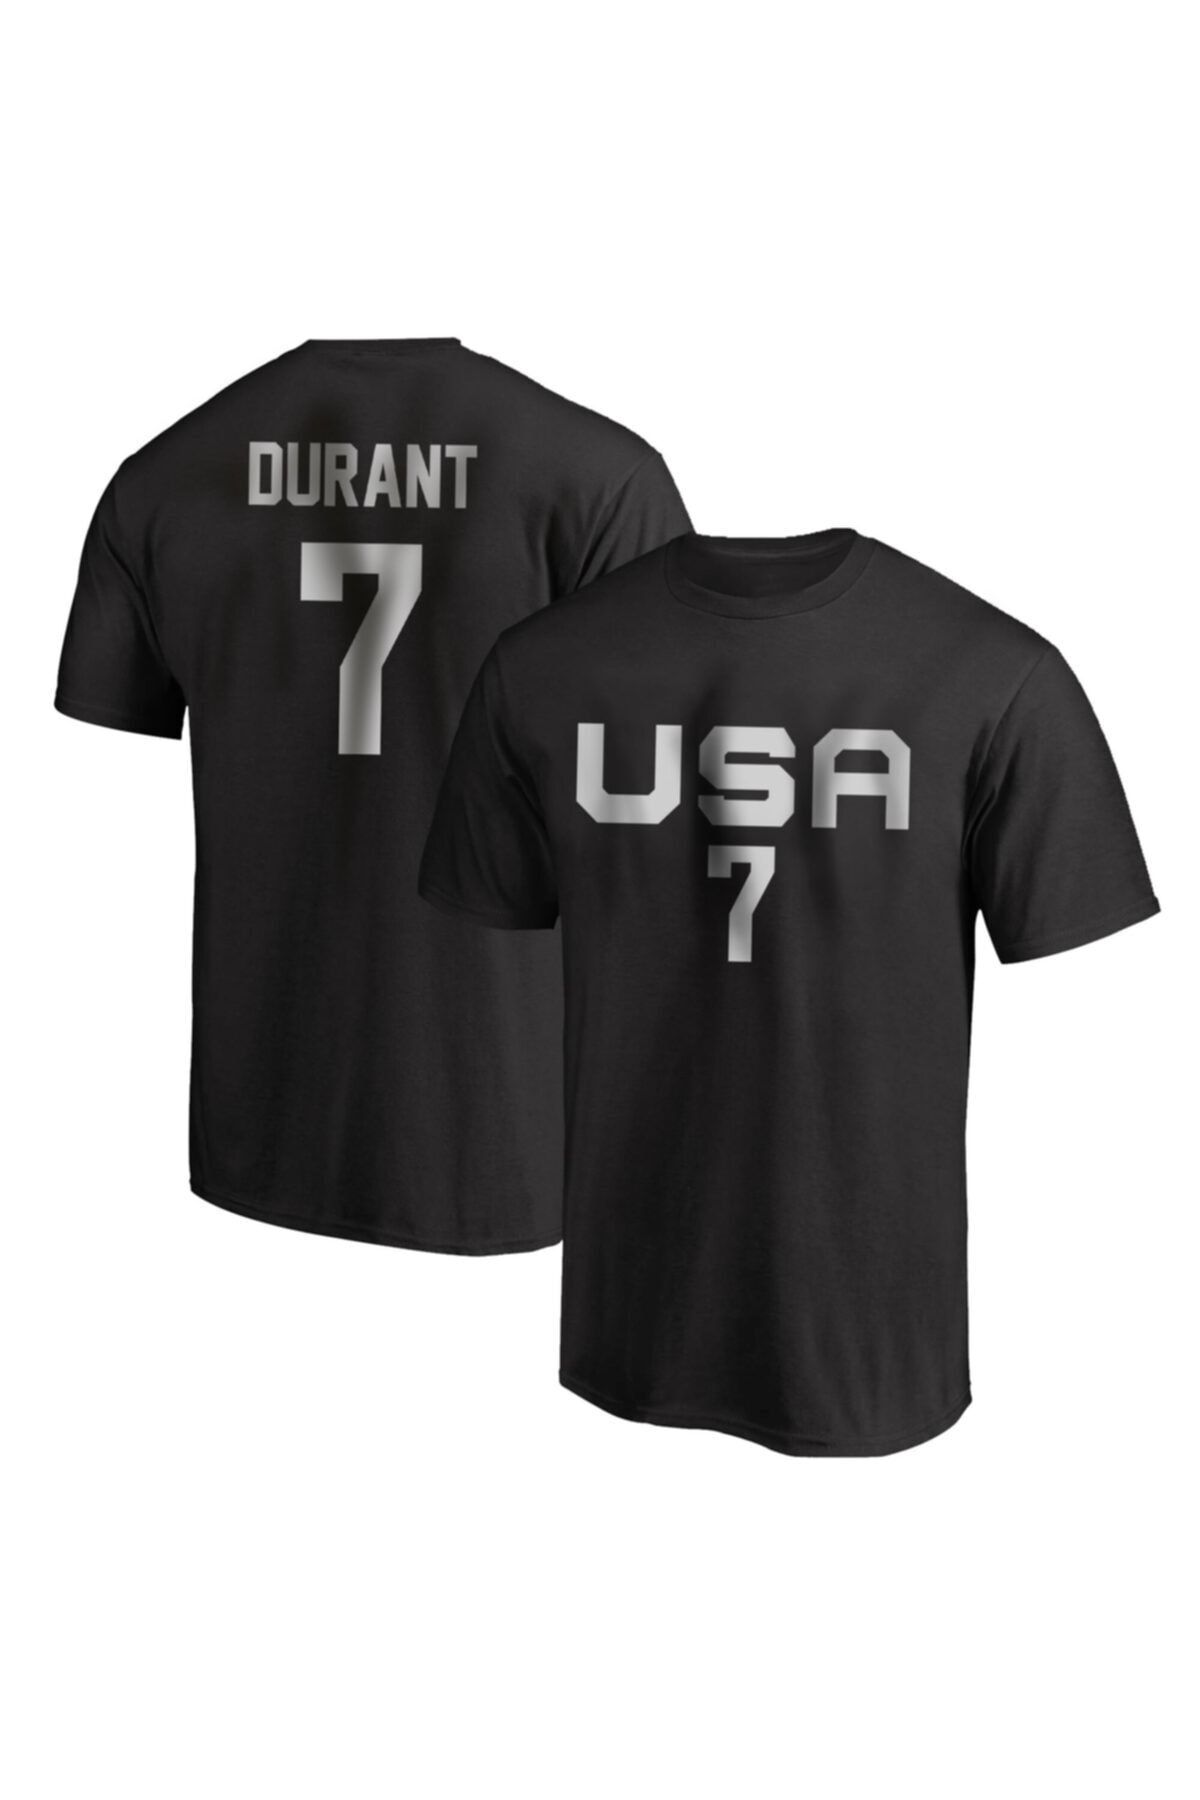 Usateamfans Olympic Team Kevin Durant Tshirt